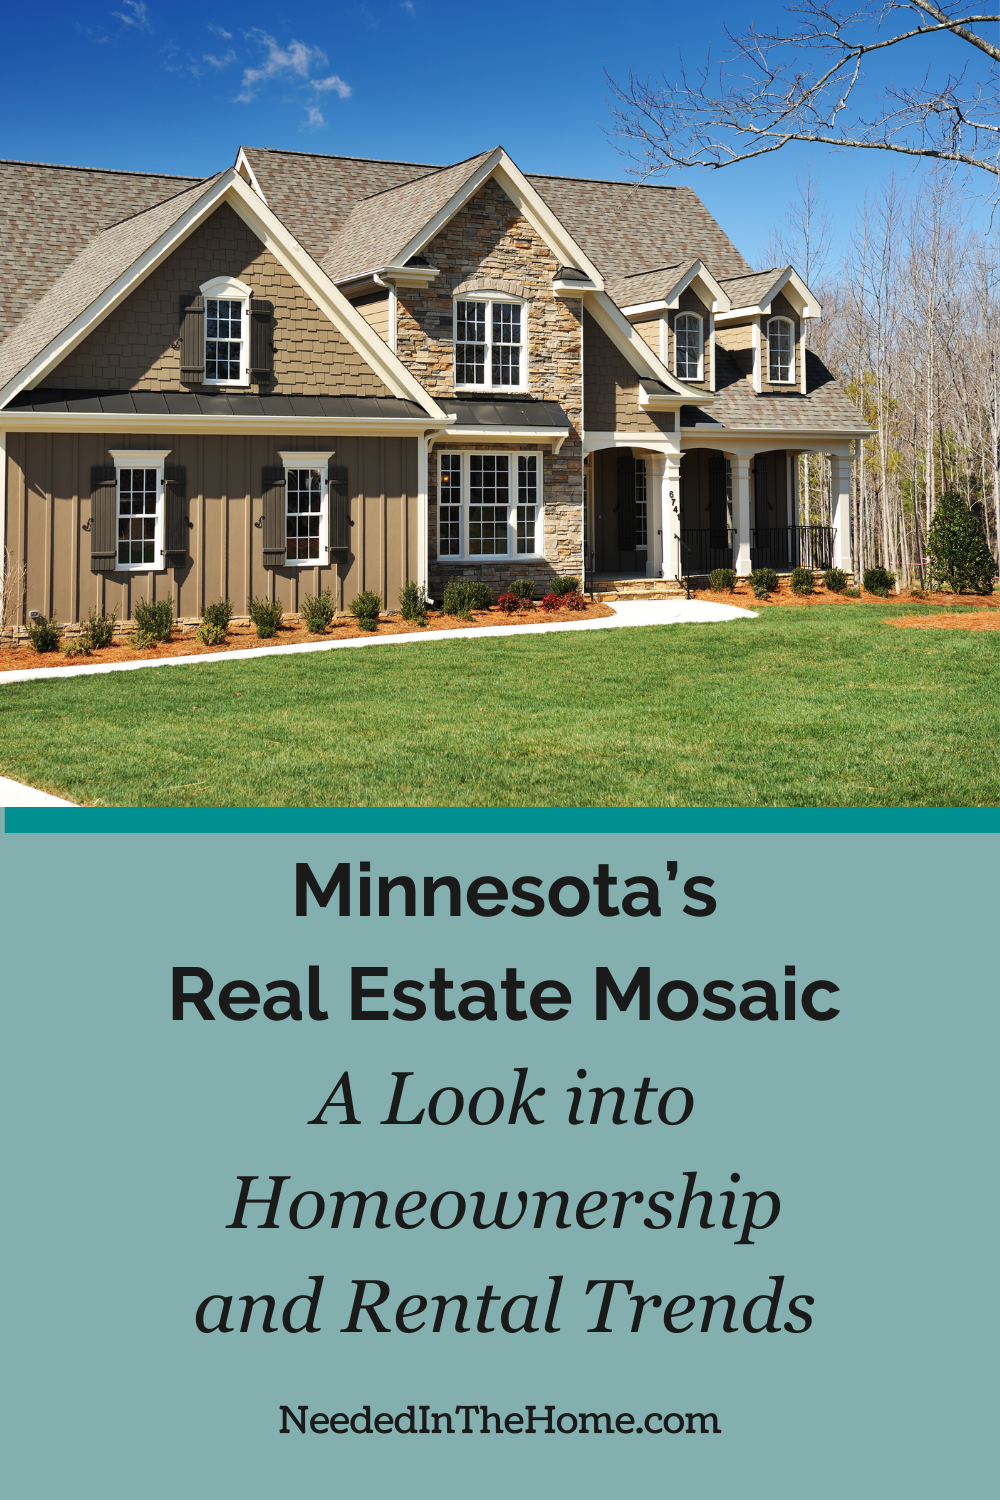 home for sale in minnesota near mature birch trees minnesota's real estate mosaic a look into homeownership and rental trends neededinthehome